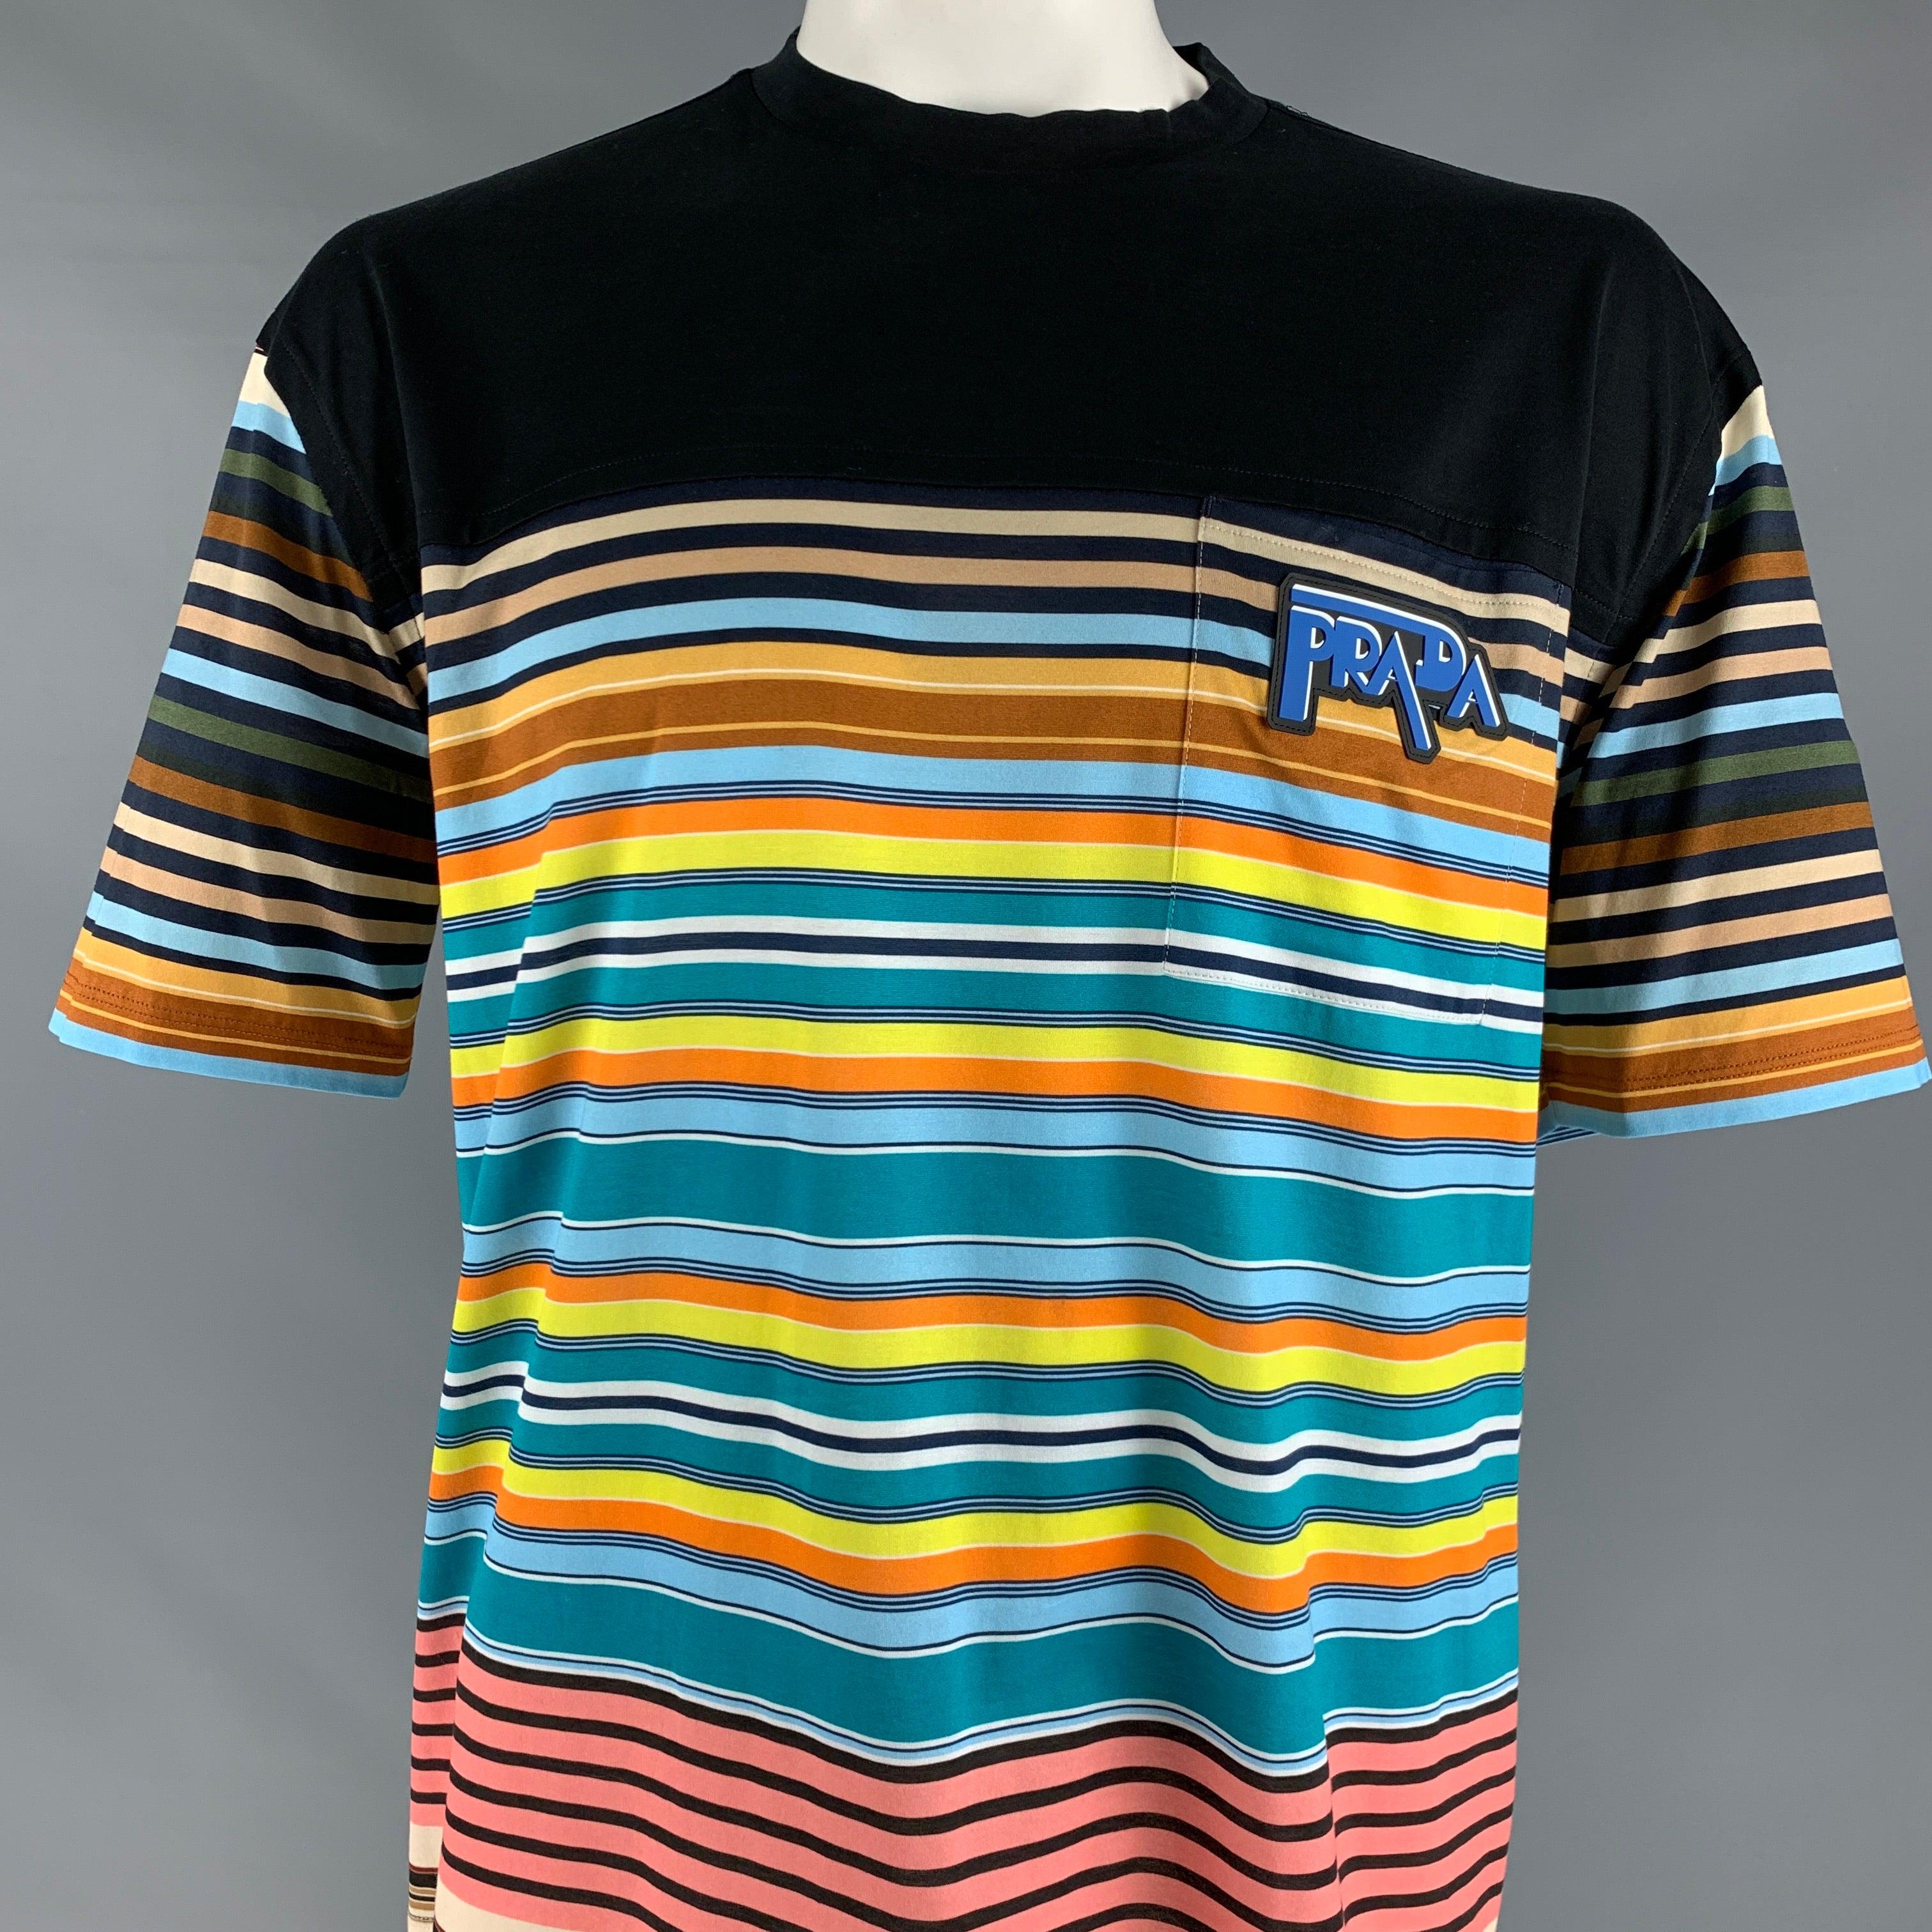 PRADA t-shirt
in a black cotton fabric featuring multi-color horizontal stripes, one pocket with Prada applique, and a crew neck. Made in Romania.Excellent Pre-Owned Condition. 

Marked:   IT 48 

Measurements: 
 
Shoulder: 24 inches  Chest: 49